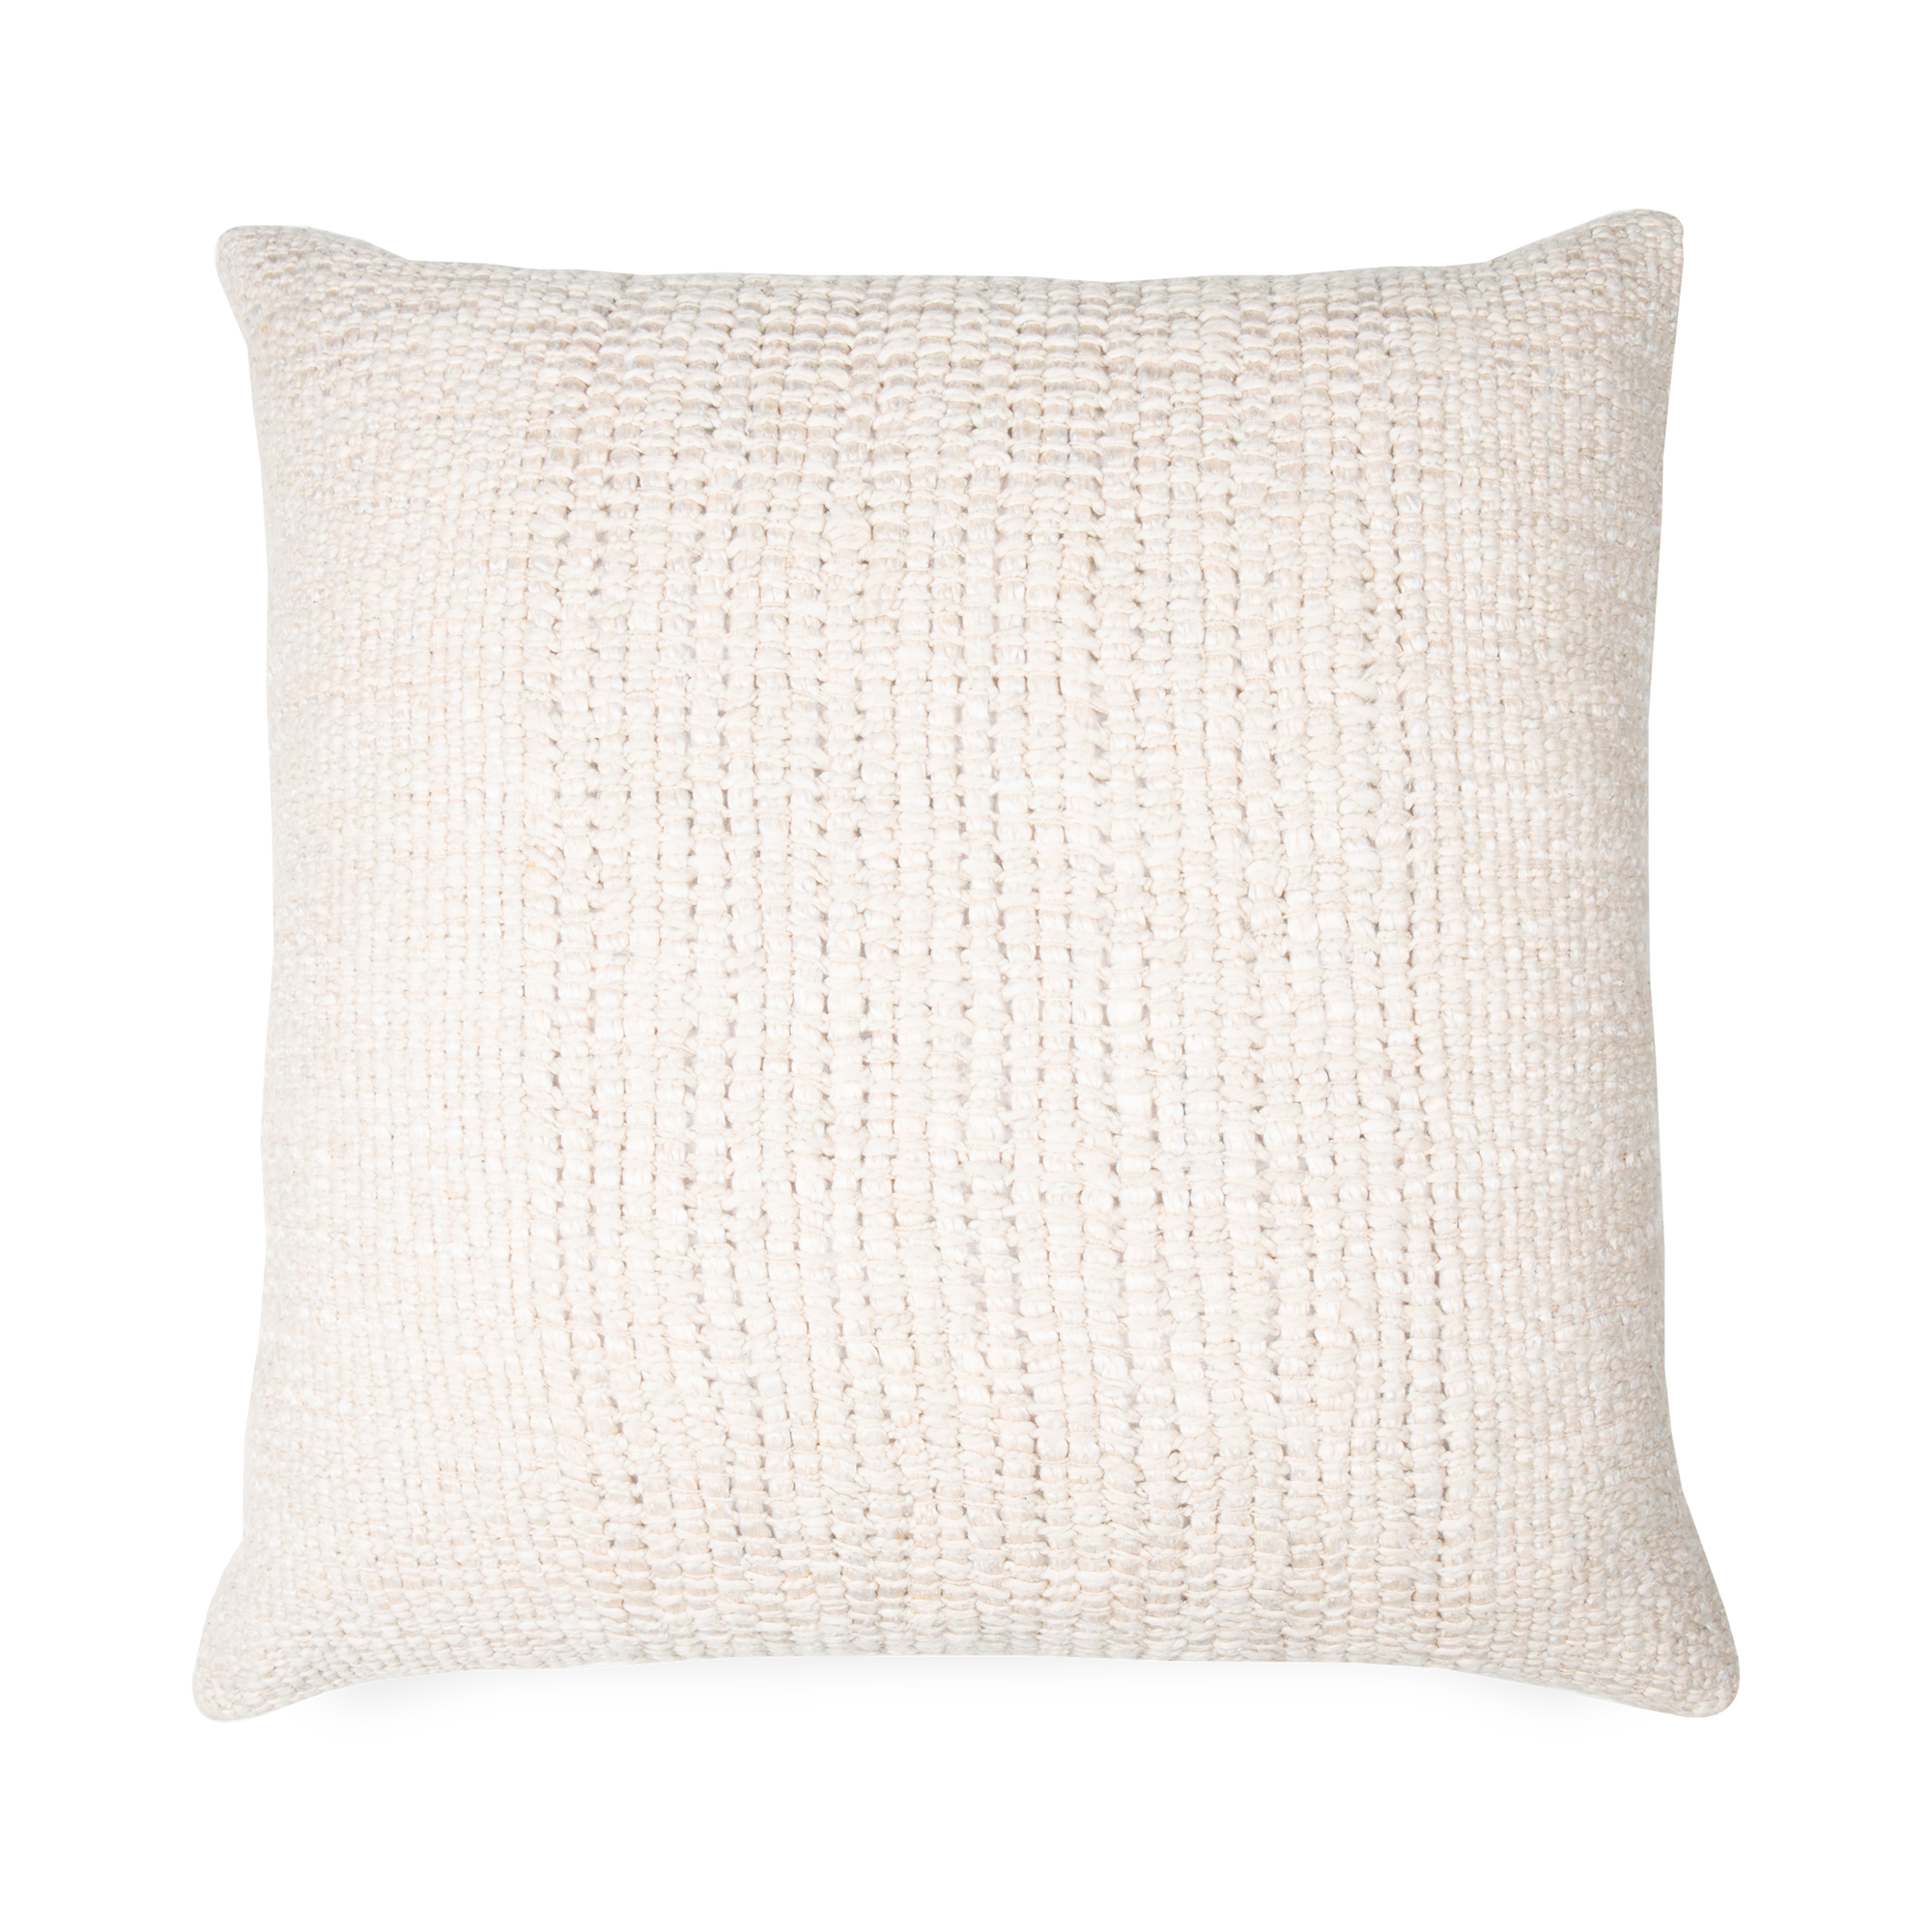 Loomed Pillow